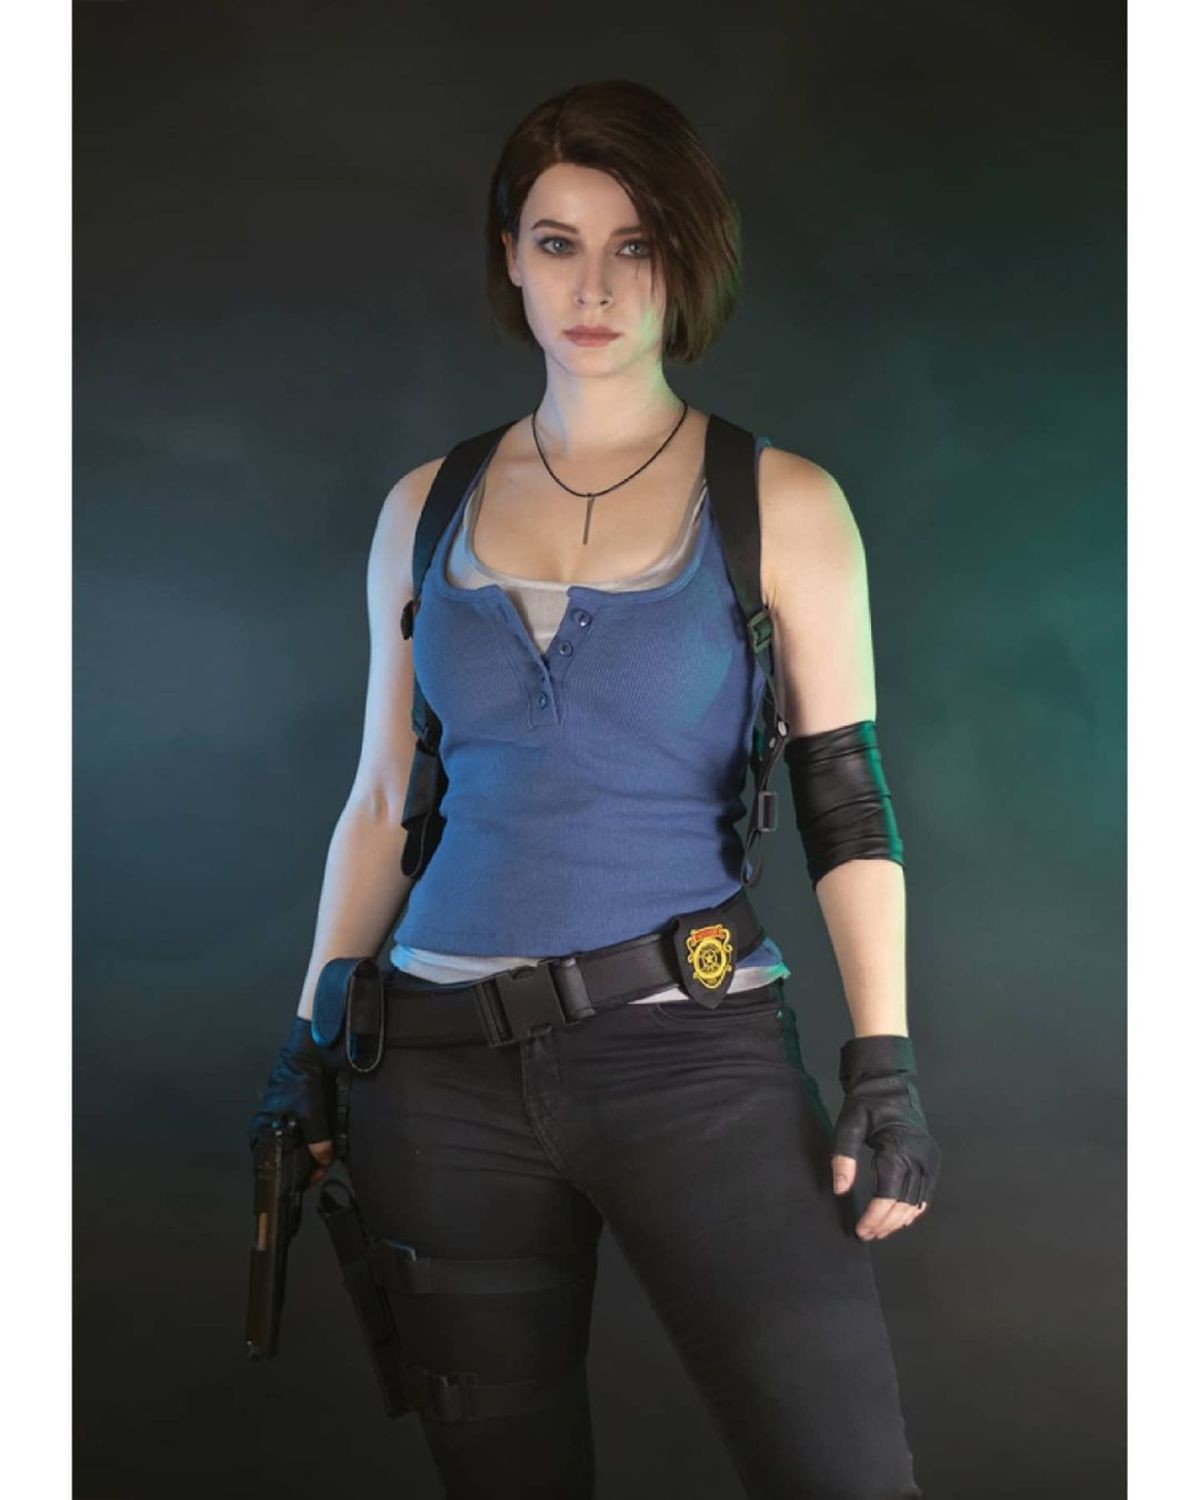 Jill Valentine by Enji ht. .. Now show the unedited versionComment edited at .